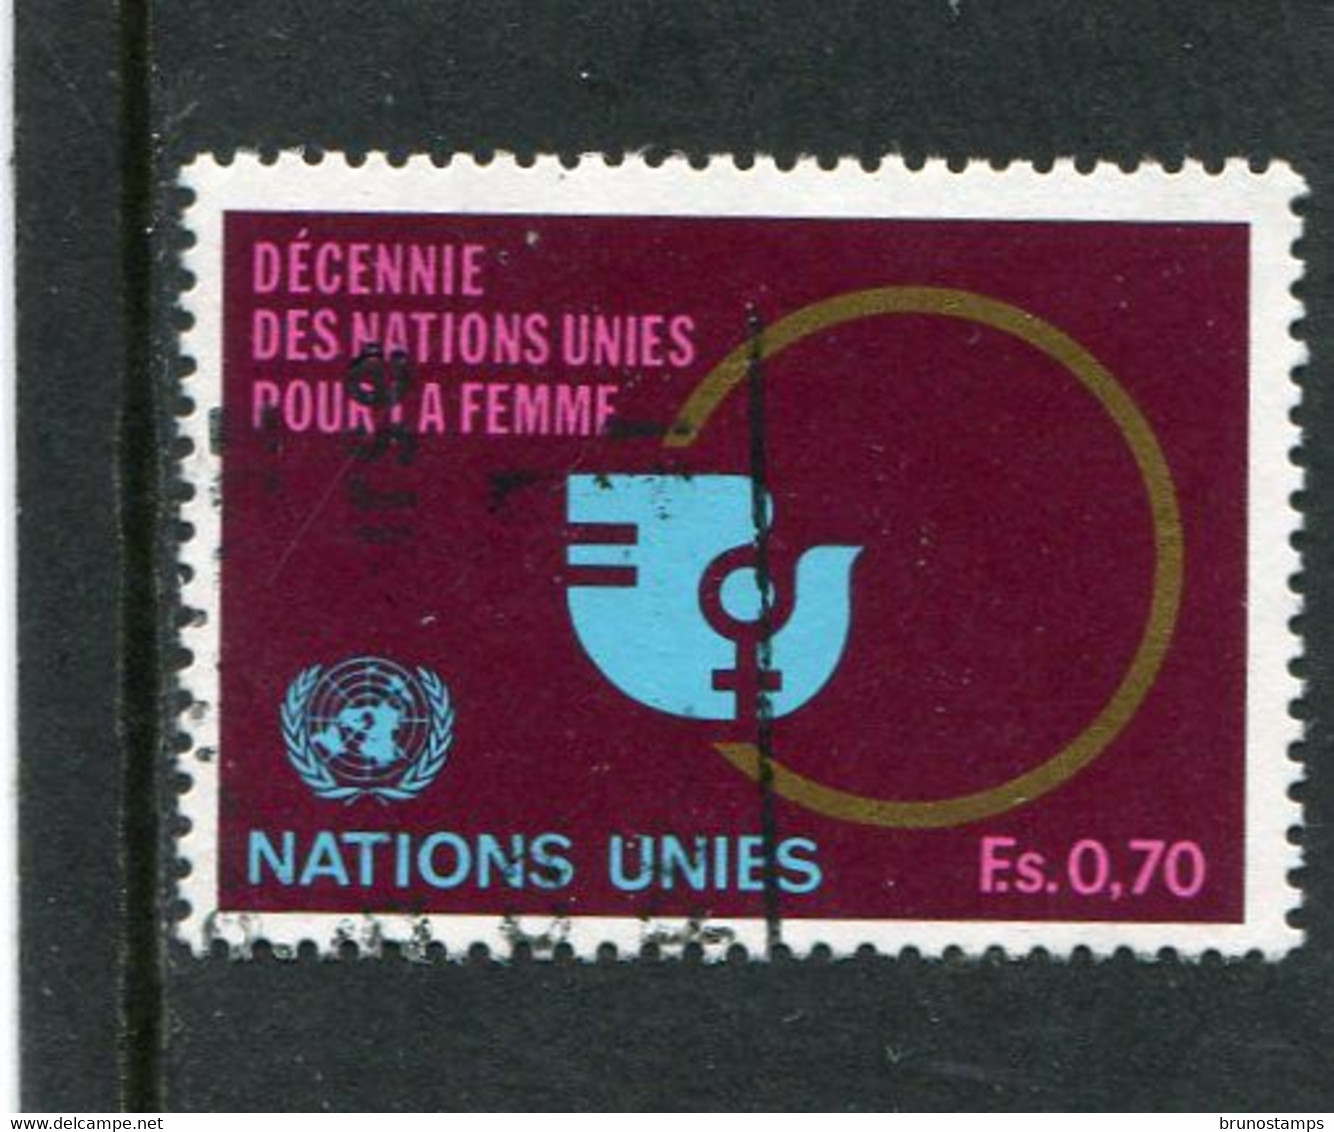 UNITED NATIONS - GENEVE  -  1980  70 C.  UN  FOR WHOMEN  FINE USED - Used Stamps